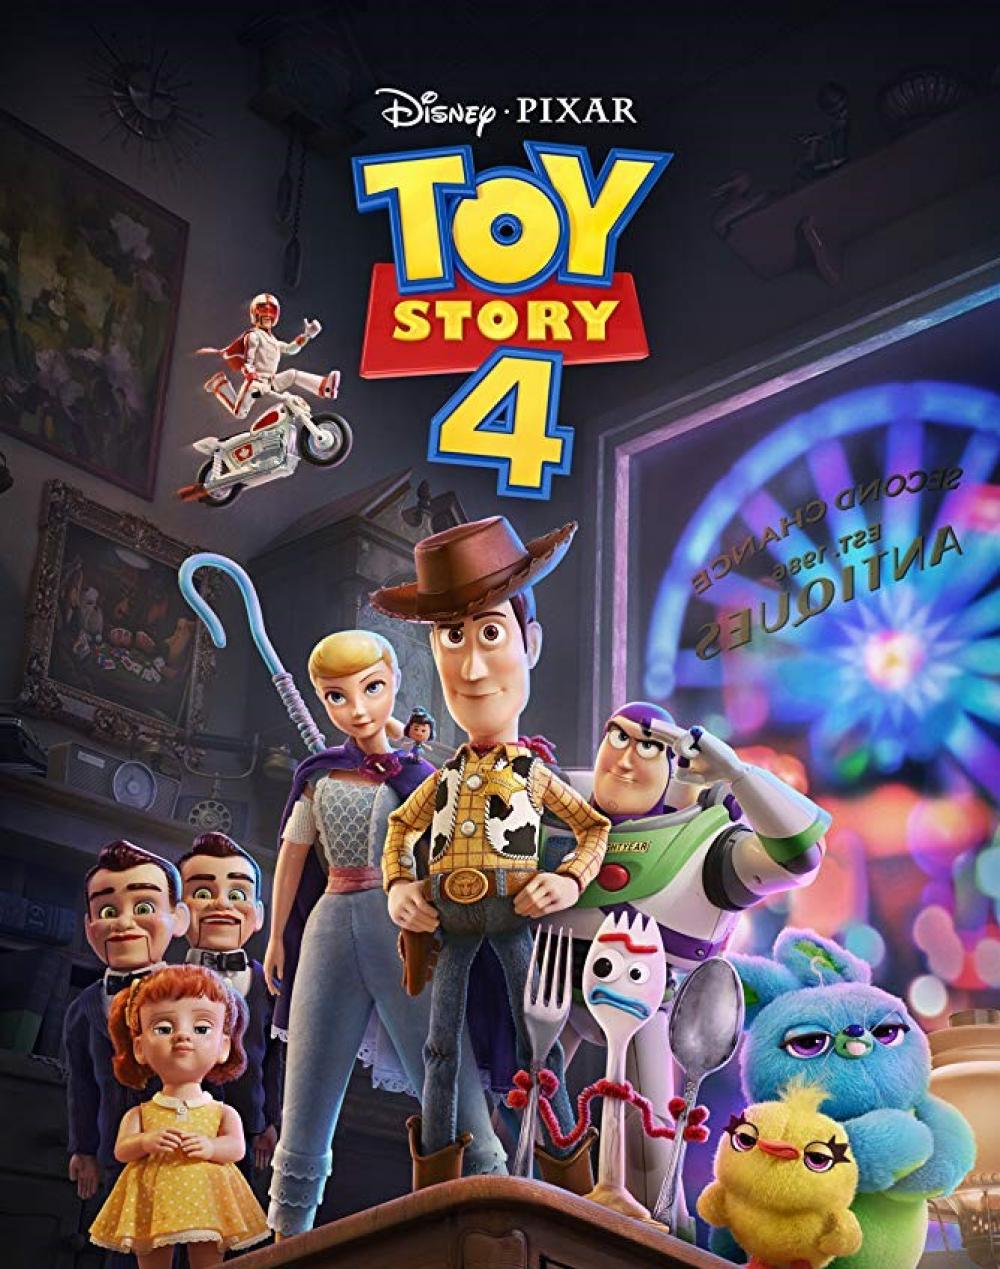 Movie night in the space - Toy Story 4